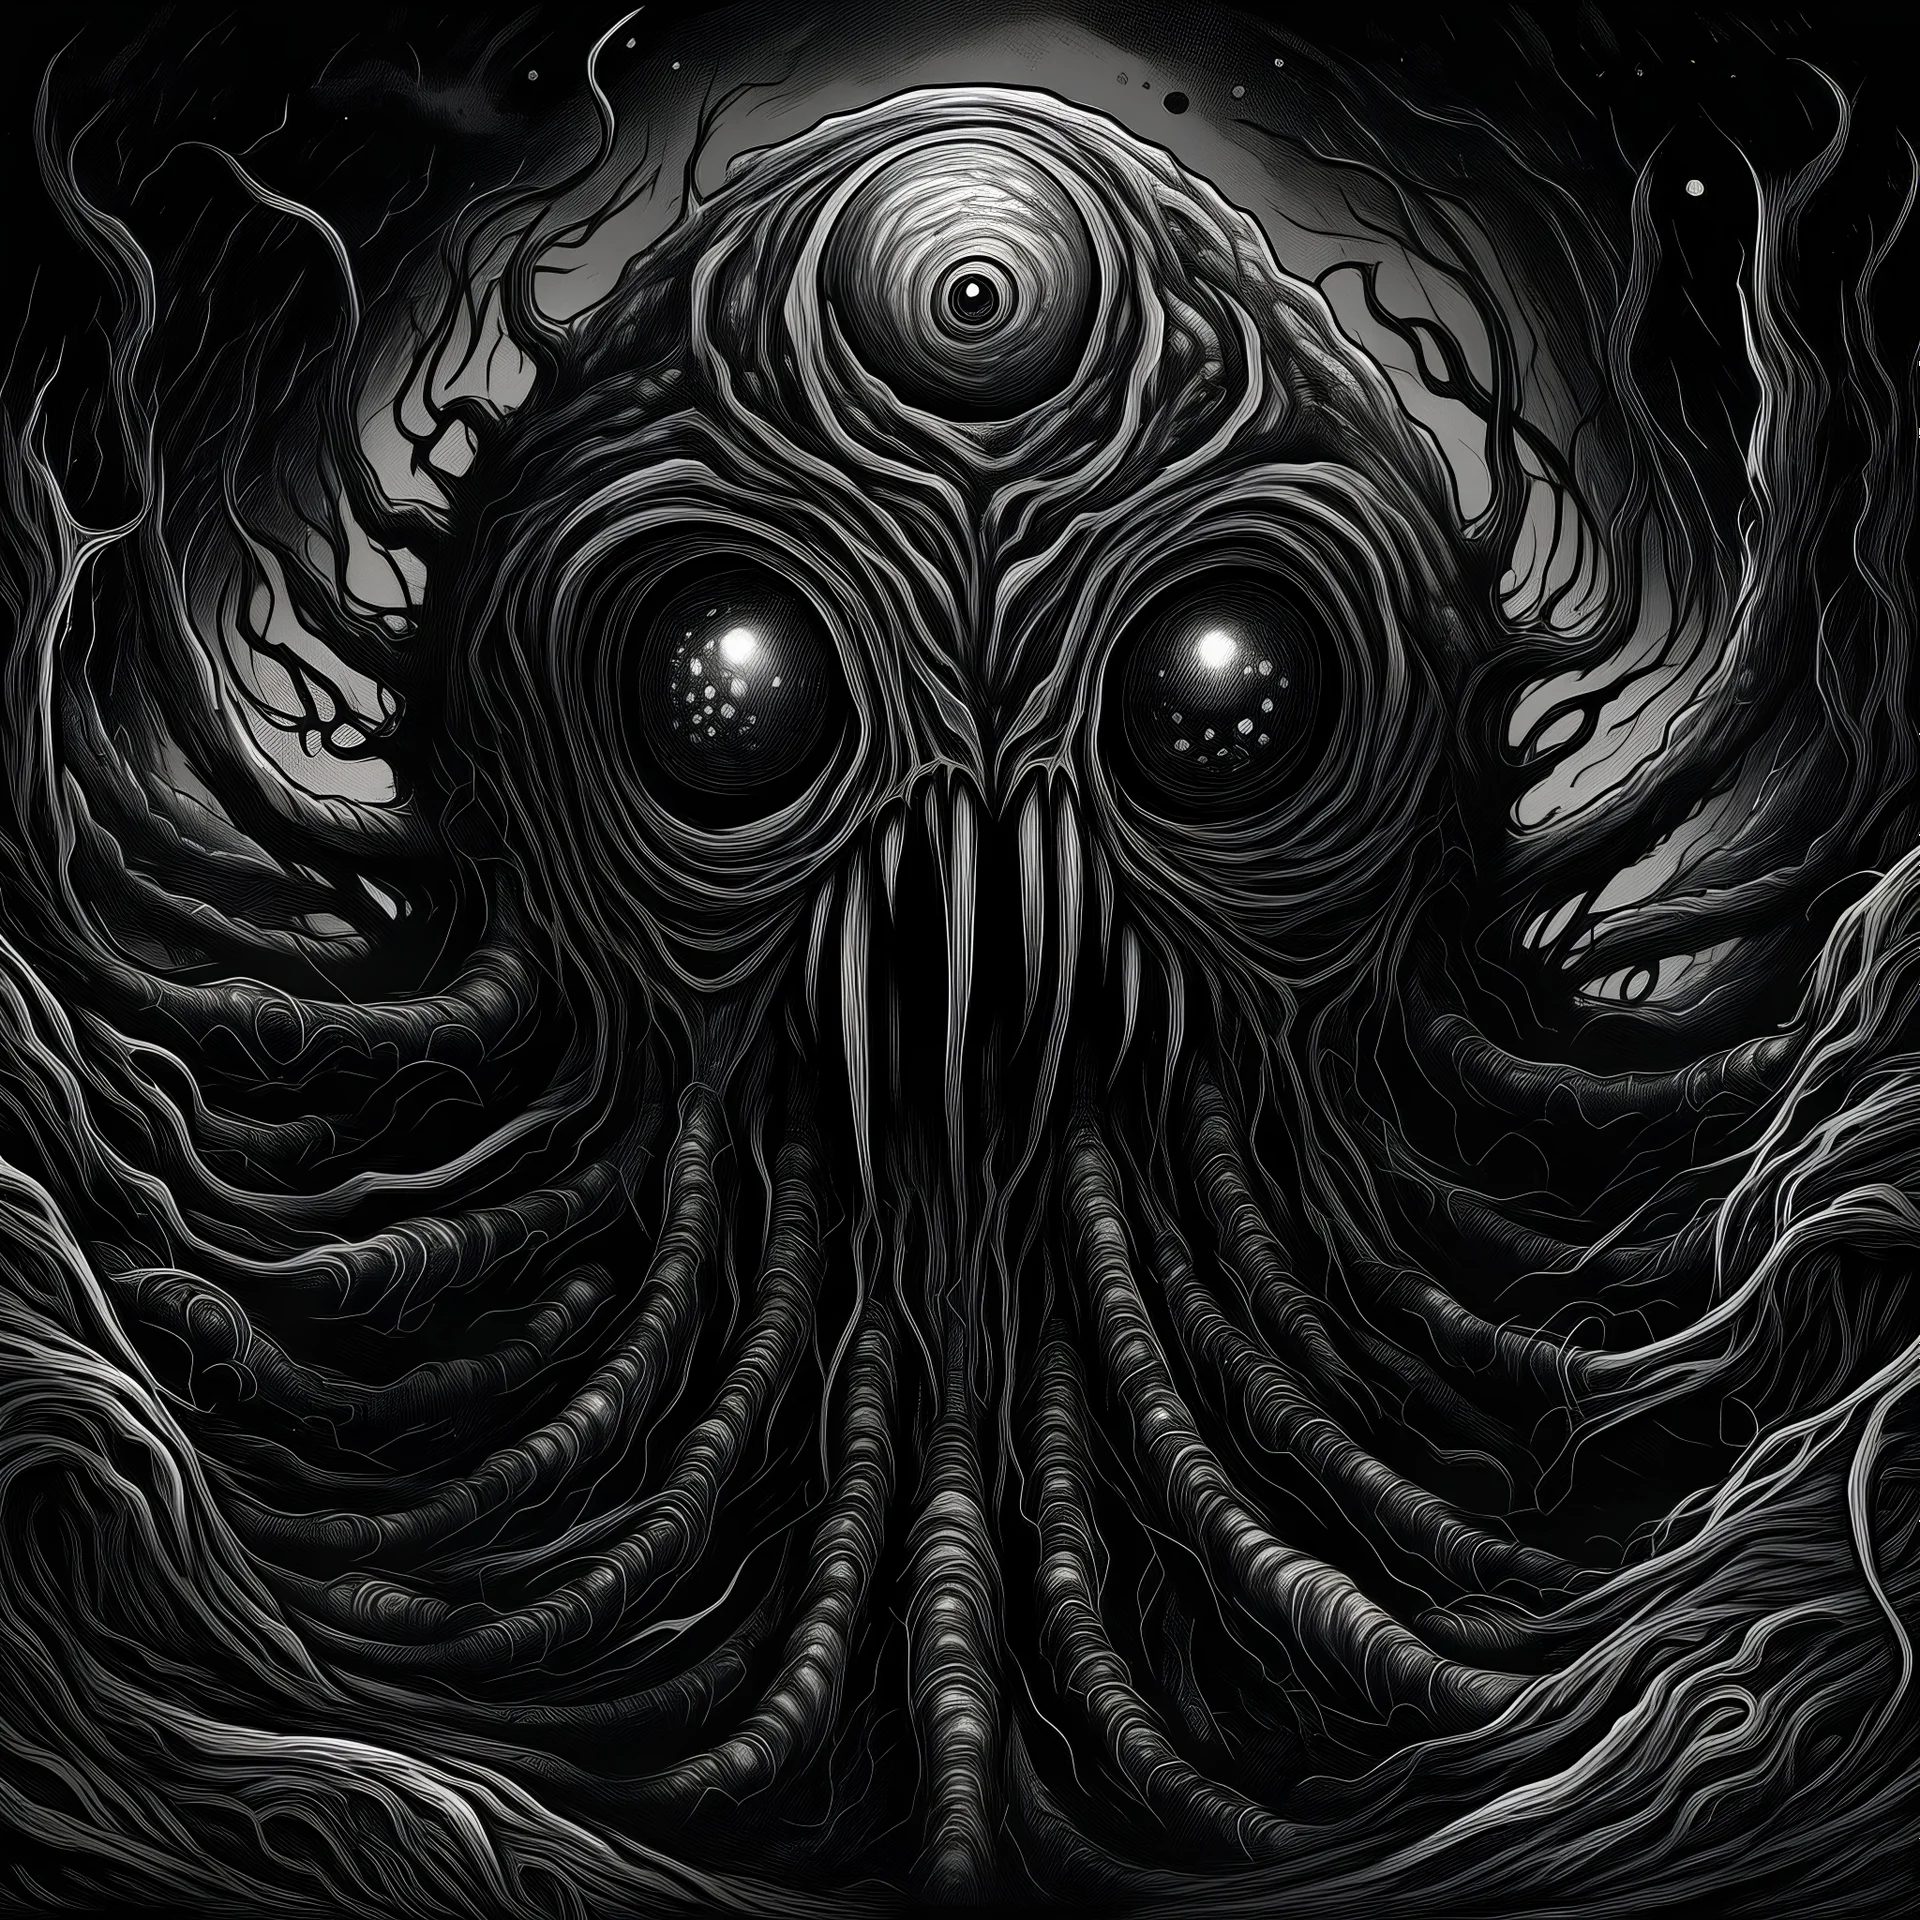 Create a monochromatic Black Metal album cover of a very detailed beholder